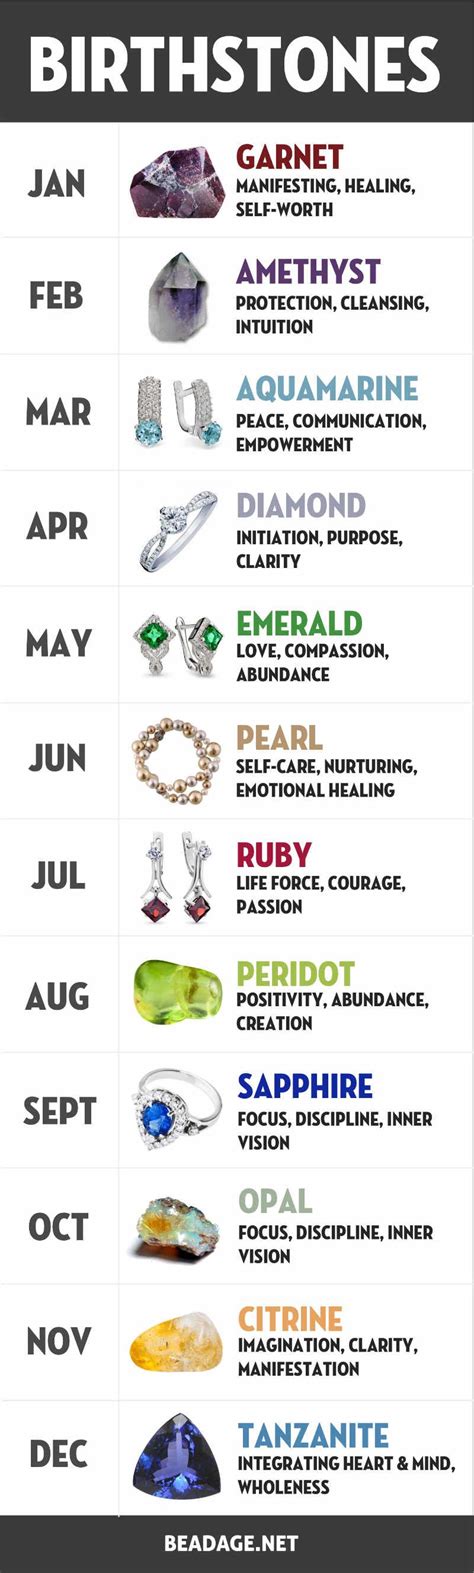 List Of Birthstones Gemstones By Month With Images Birthstones